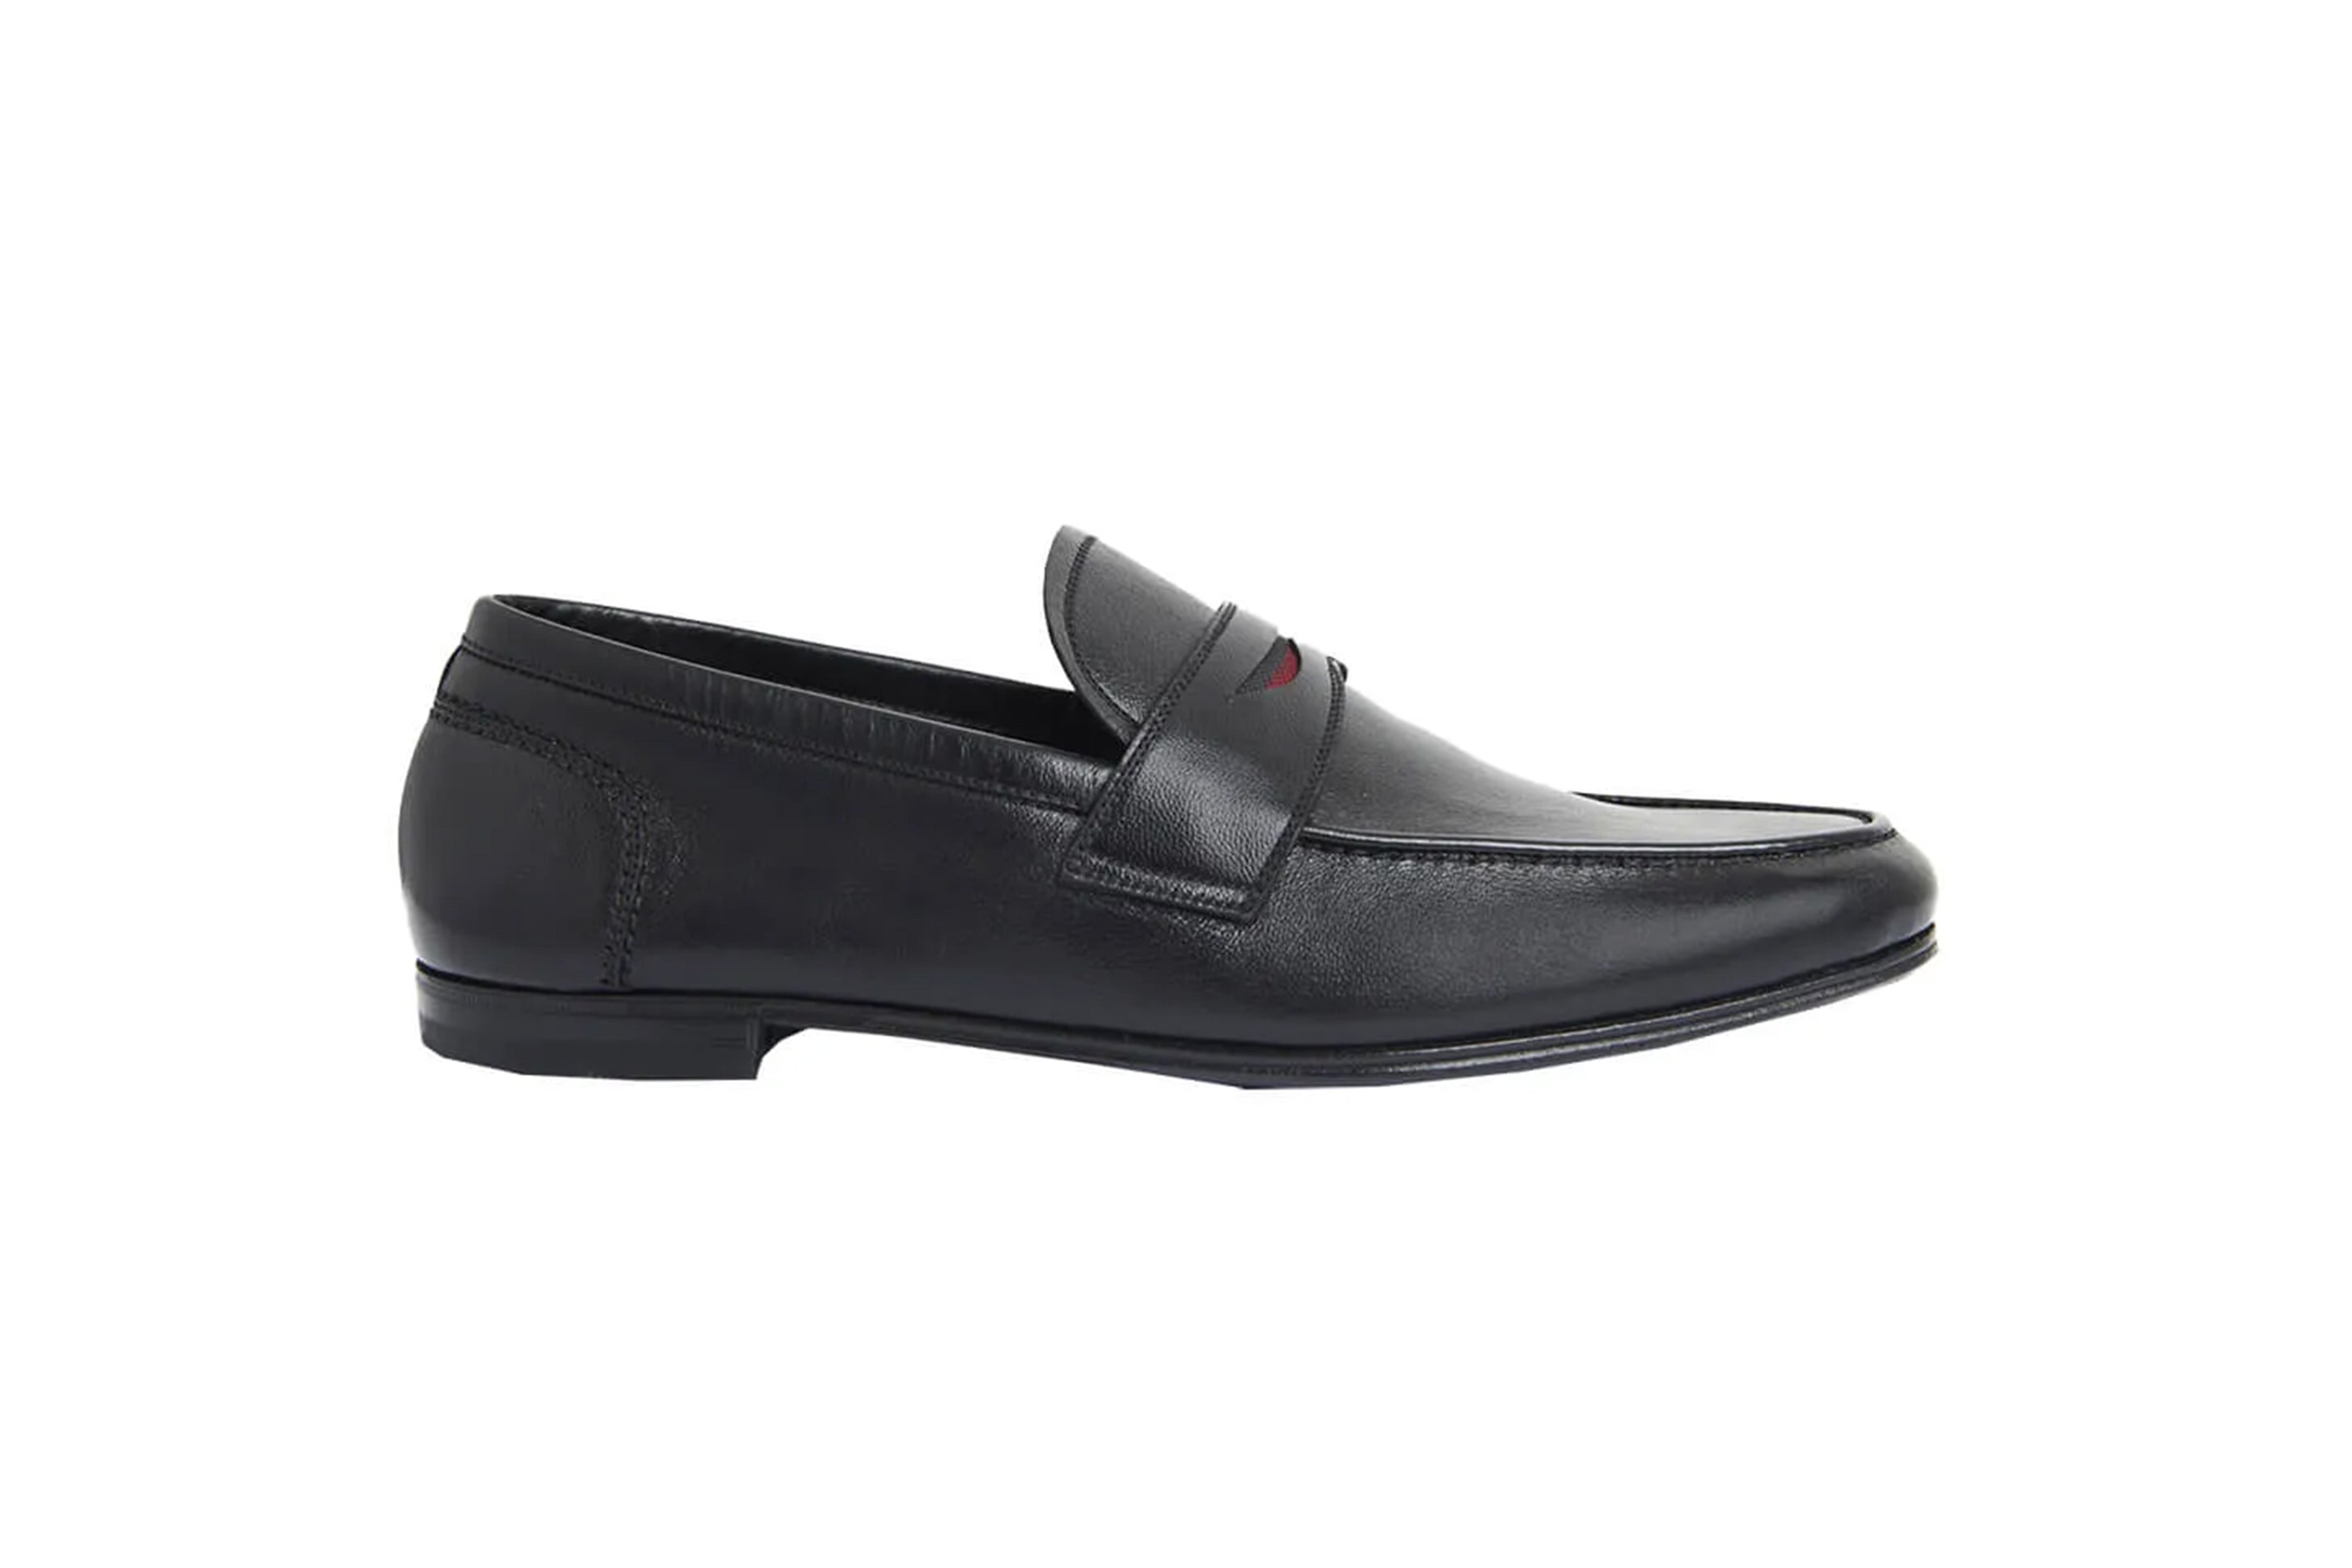 Italian style loafers - Paolo in Black